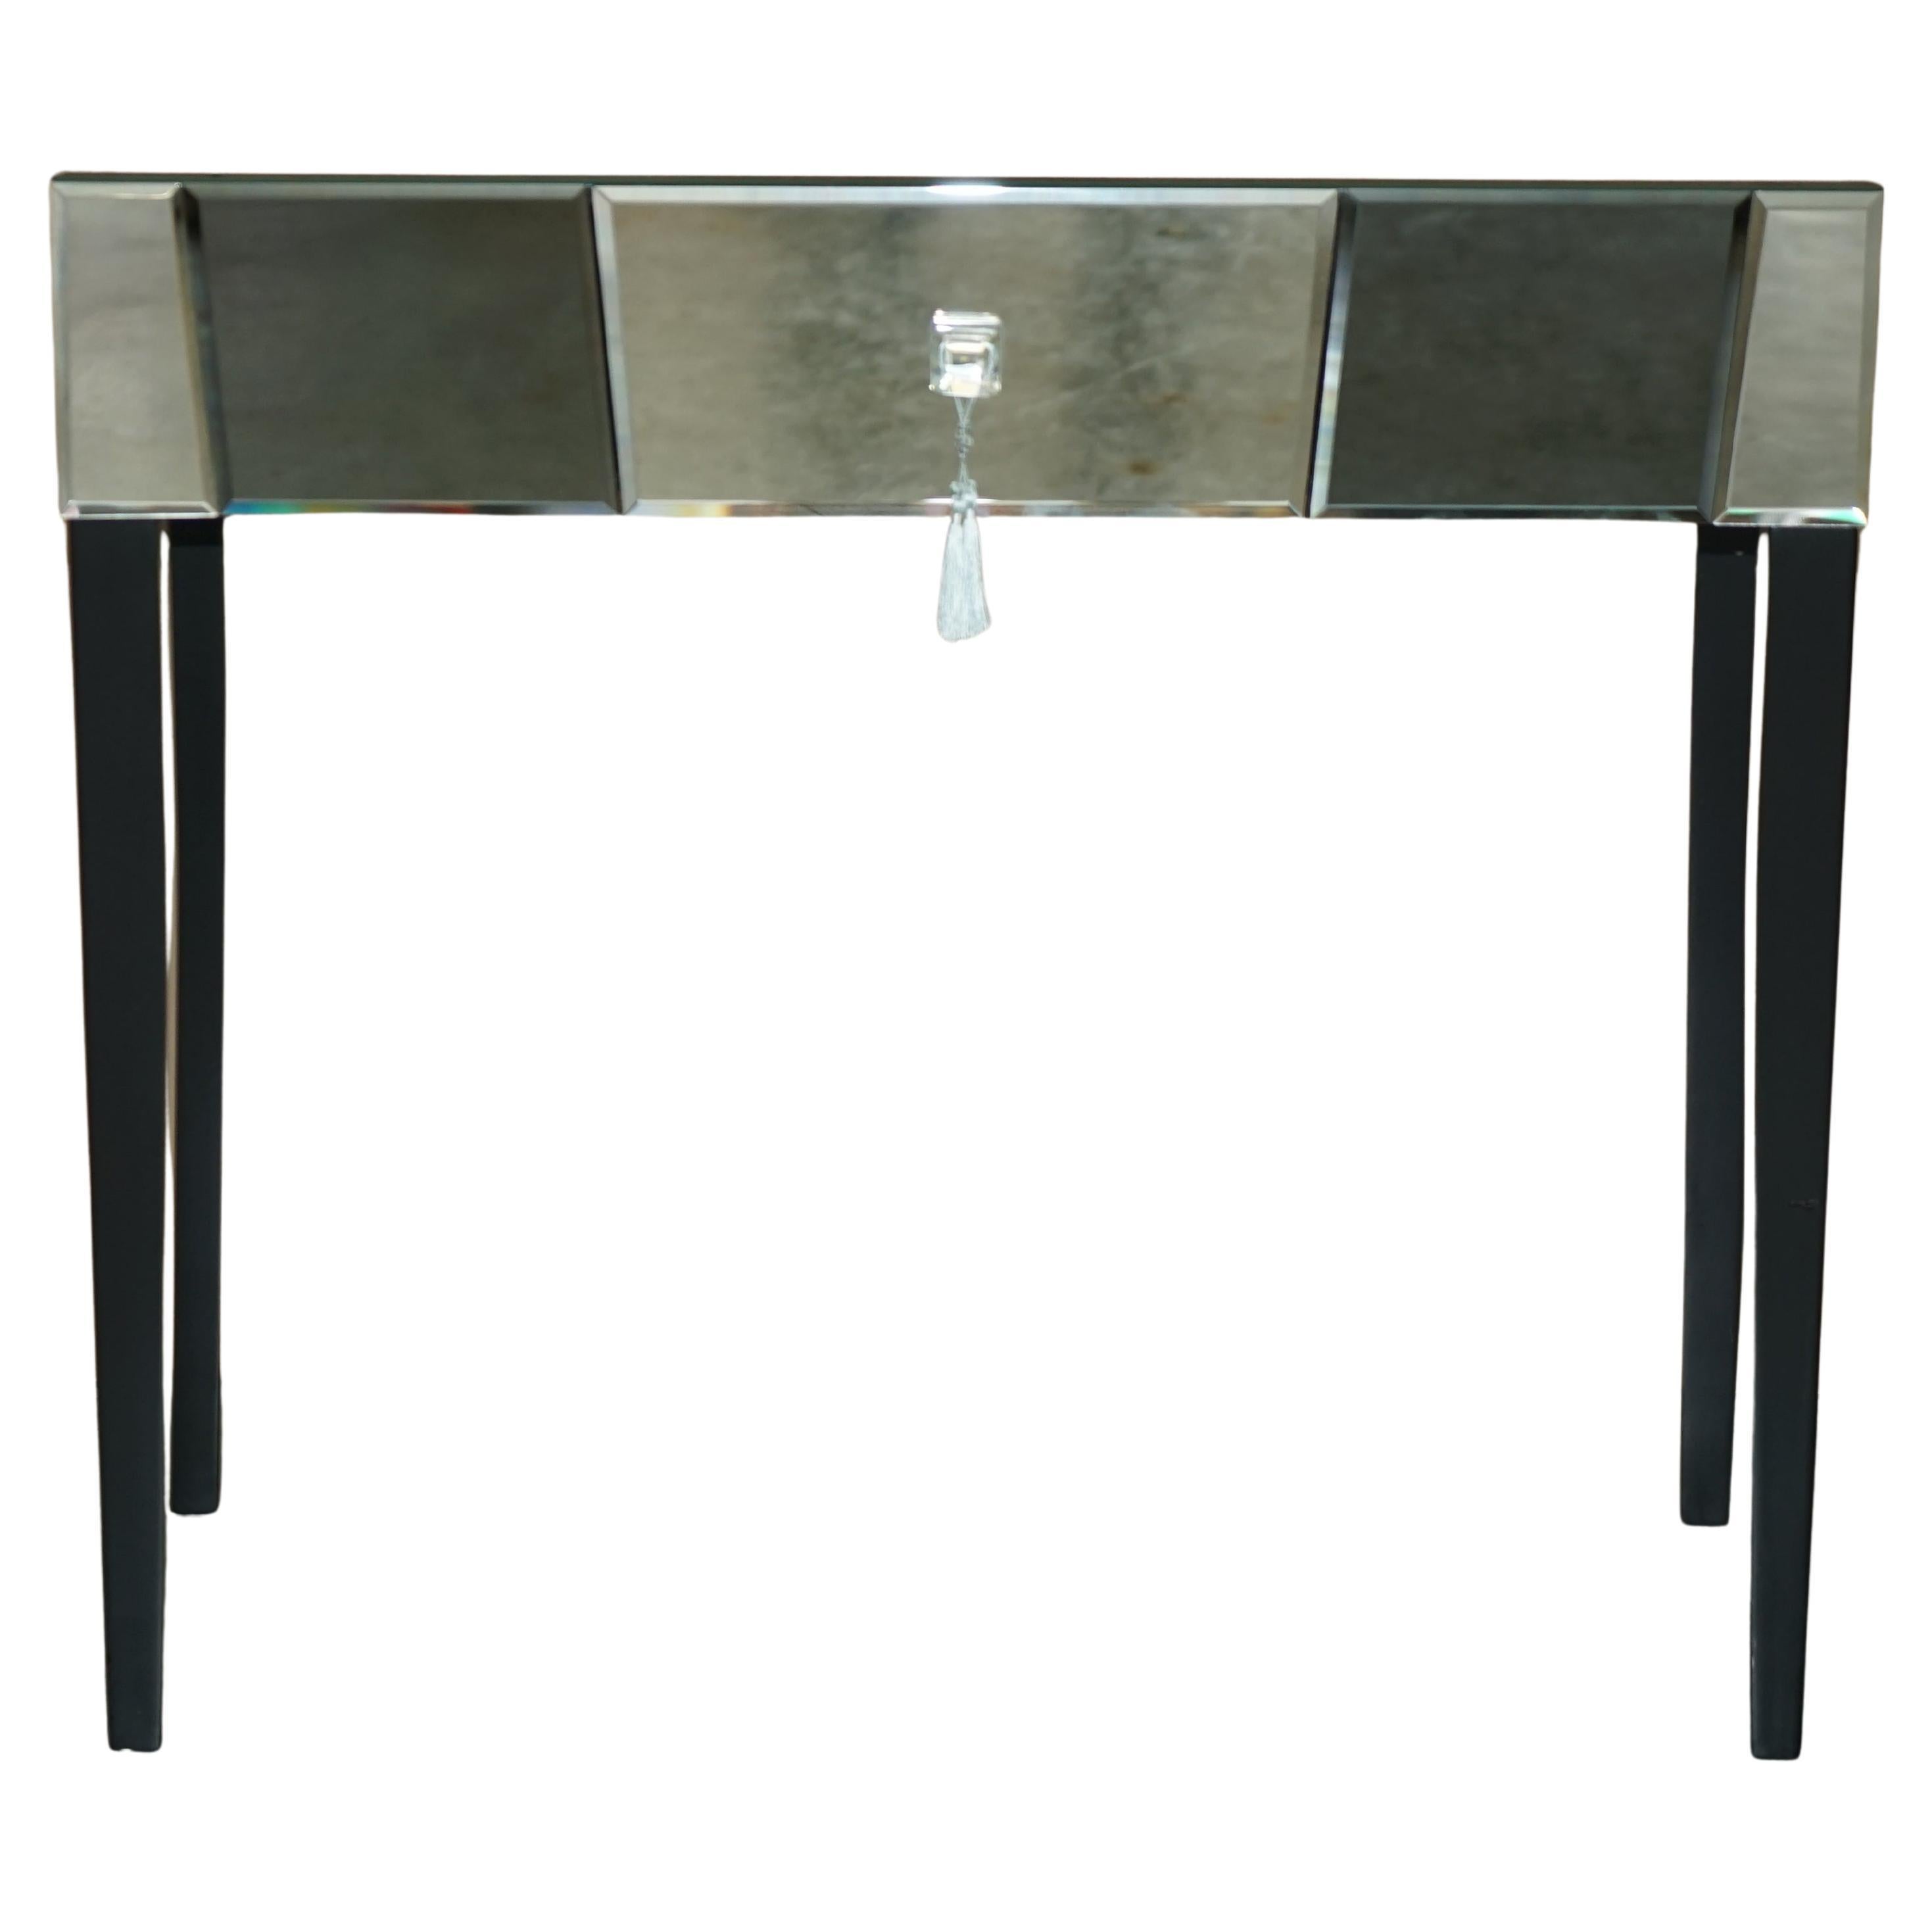 Decorative Art Deco Style Mirrored Dressing Table or Desk Which Is Part of Suite